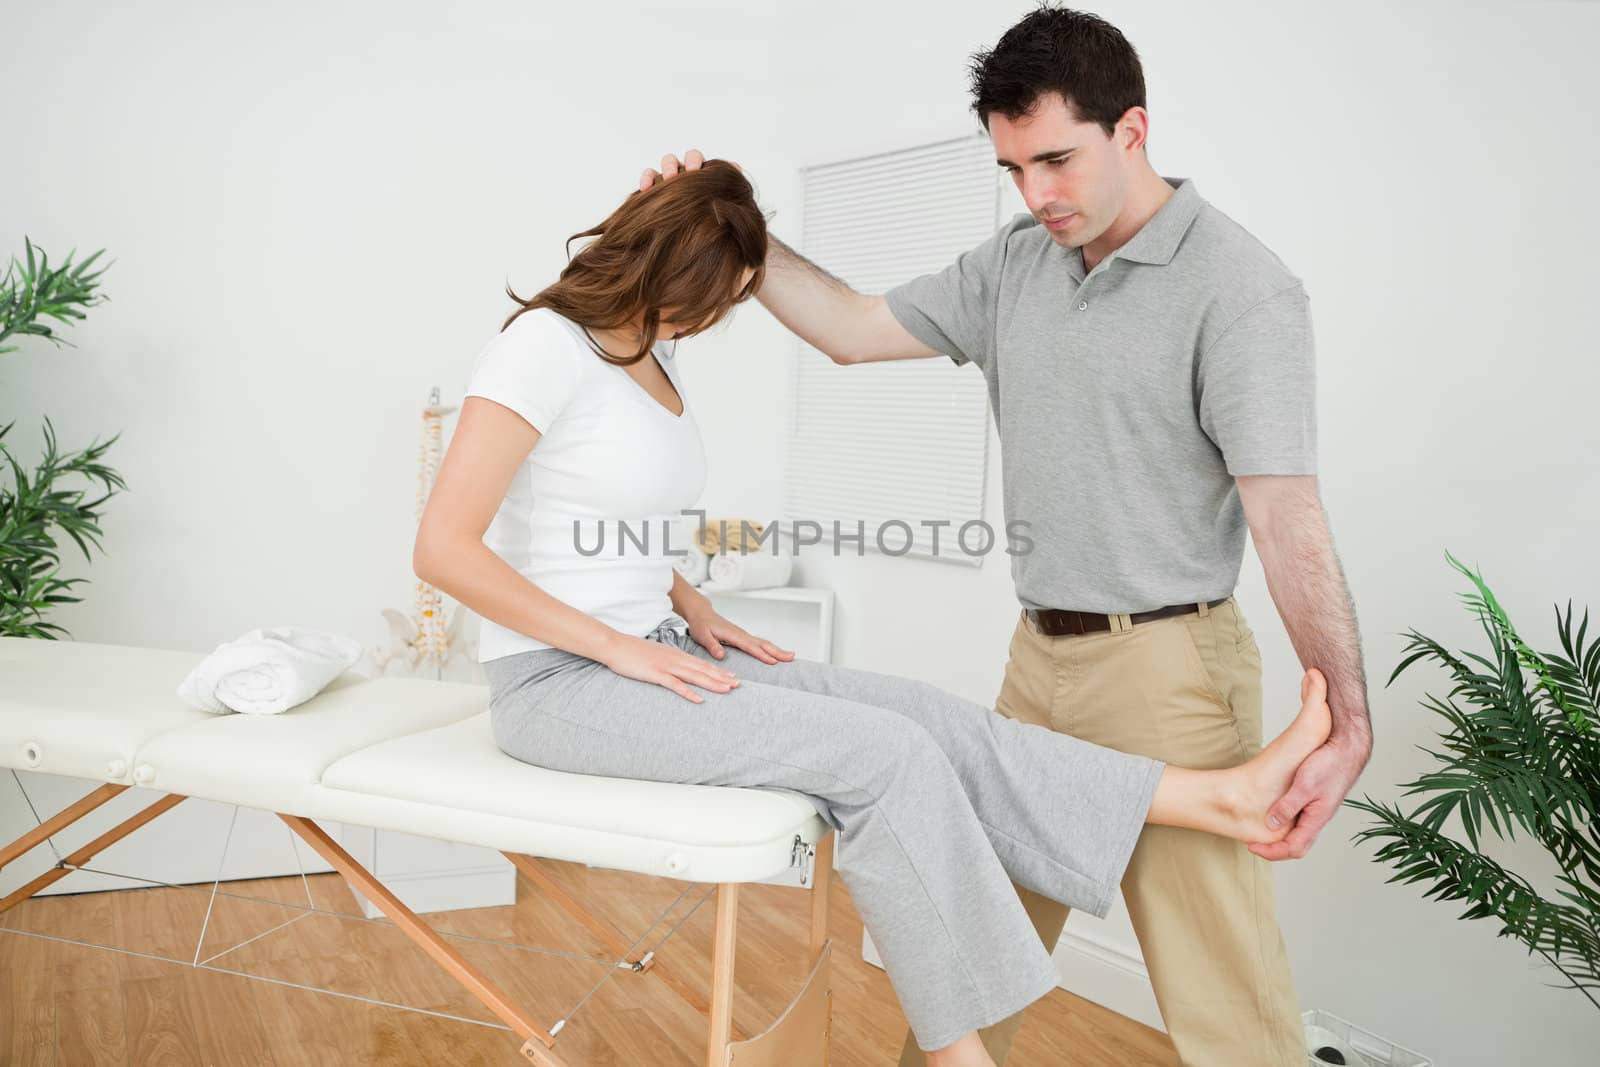 Physiotherapist manipulating his patient while standing in a medical room